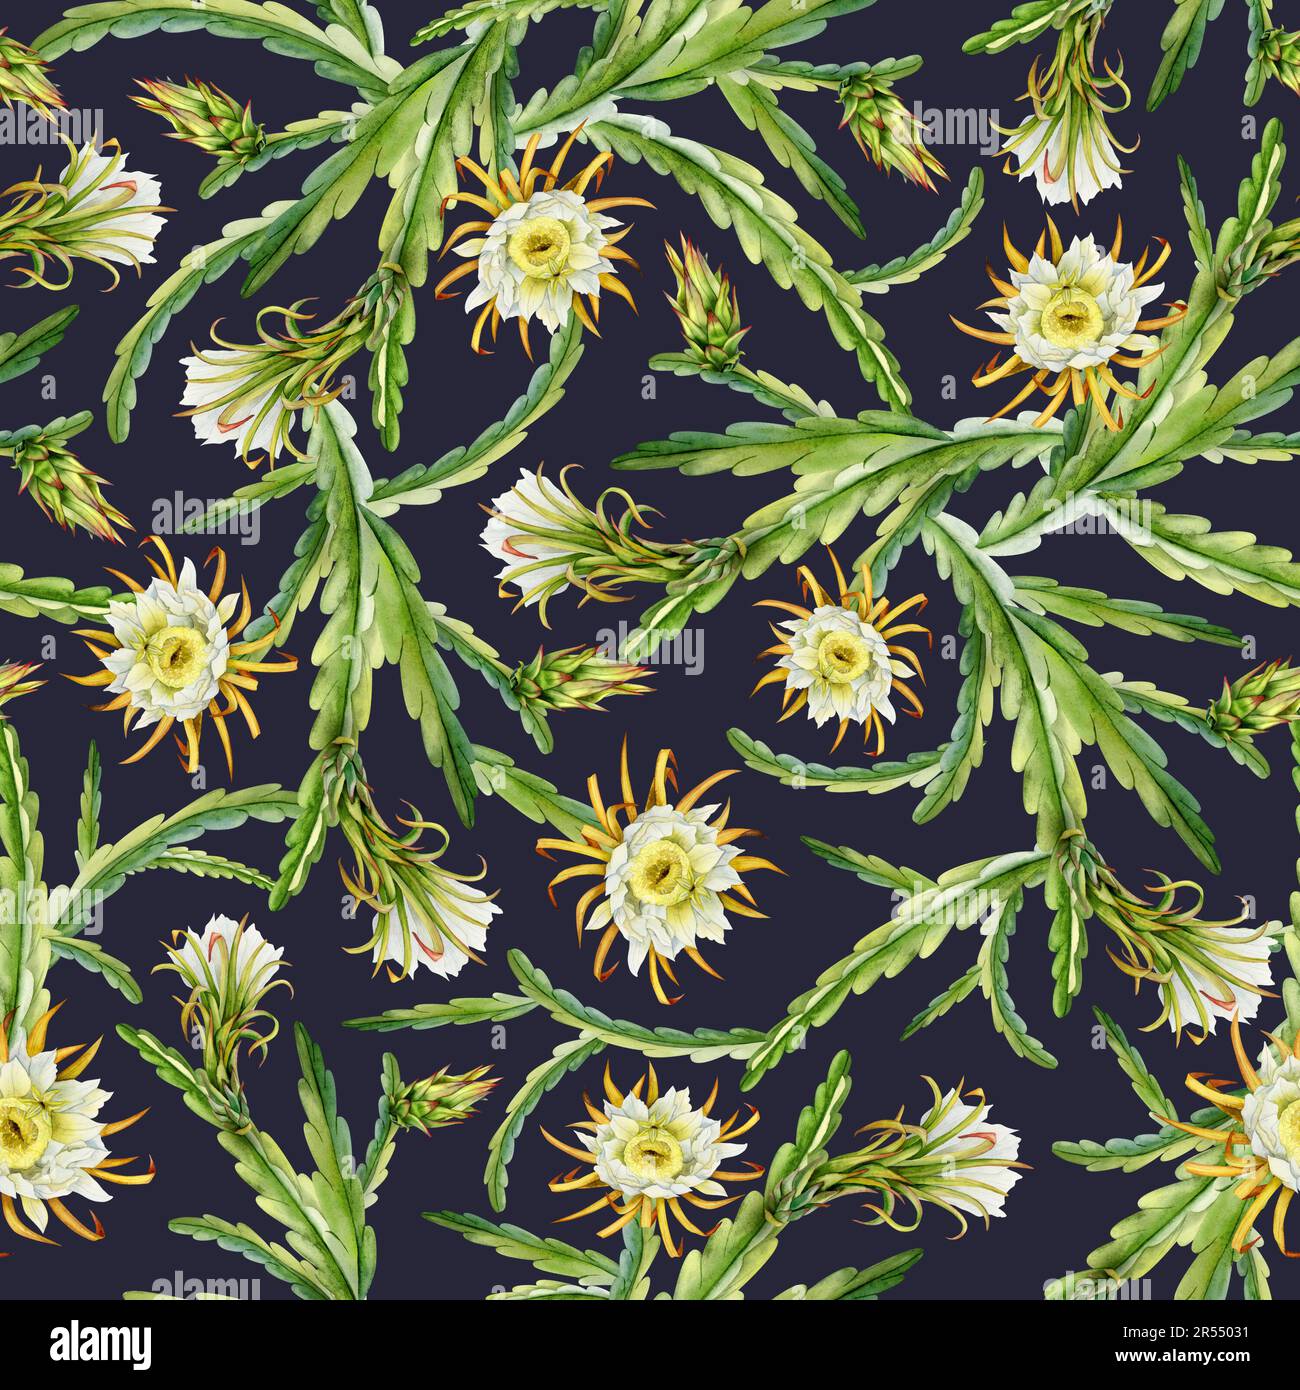 Dark blue and green blooming cactus branches with flowers and buds watercolor seamless pattern. Botanical background Stock Photo